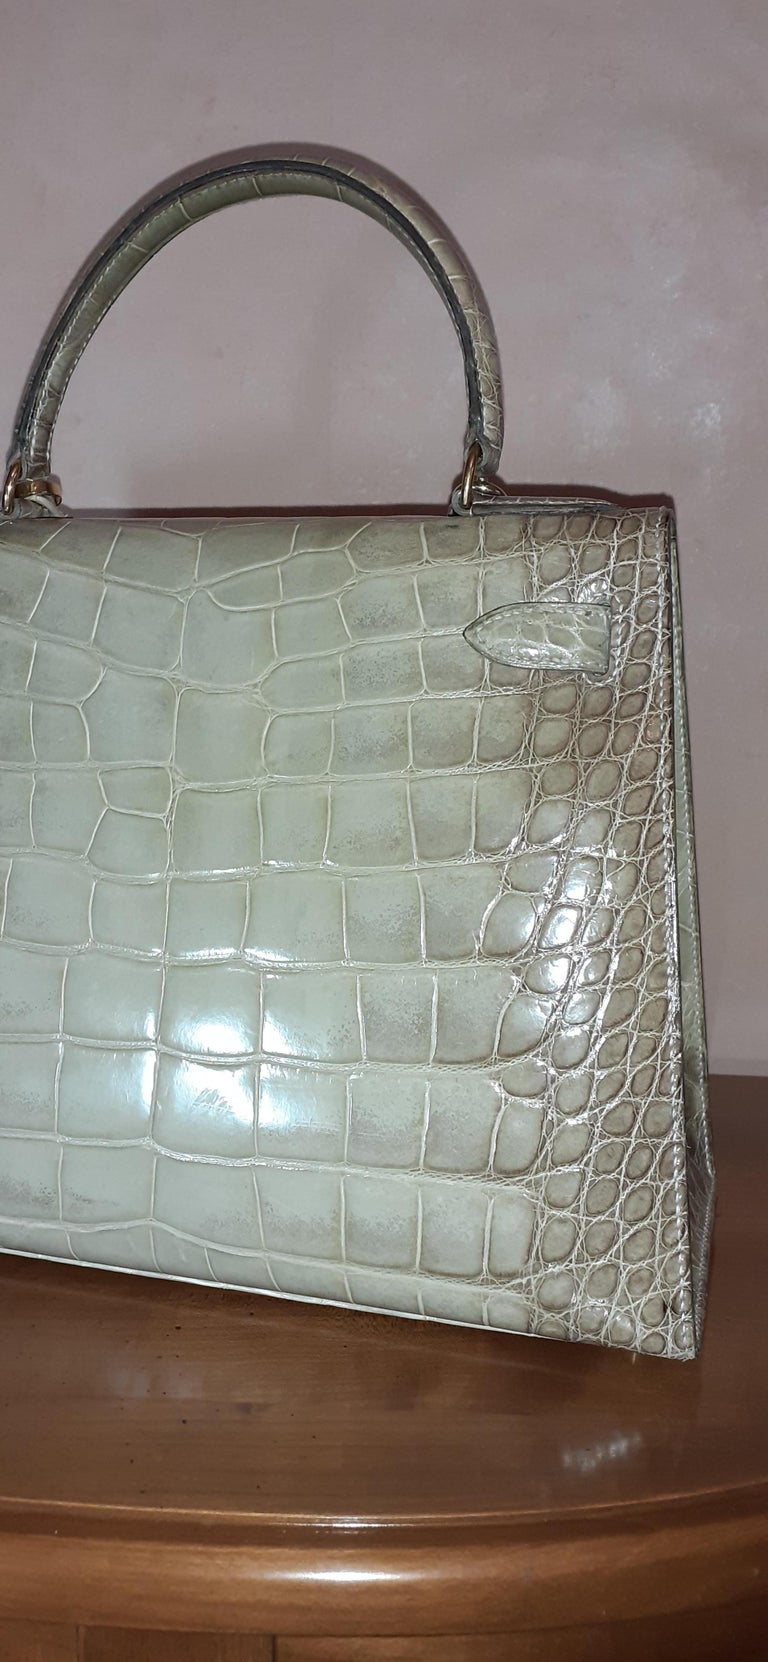 Hermes 28cm Shiny Vert Chartreuse Alligator Sellier Kelly Bag with